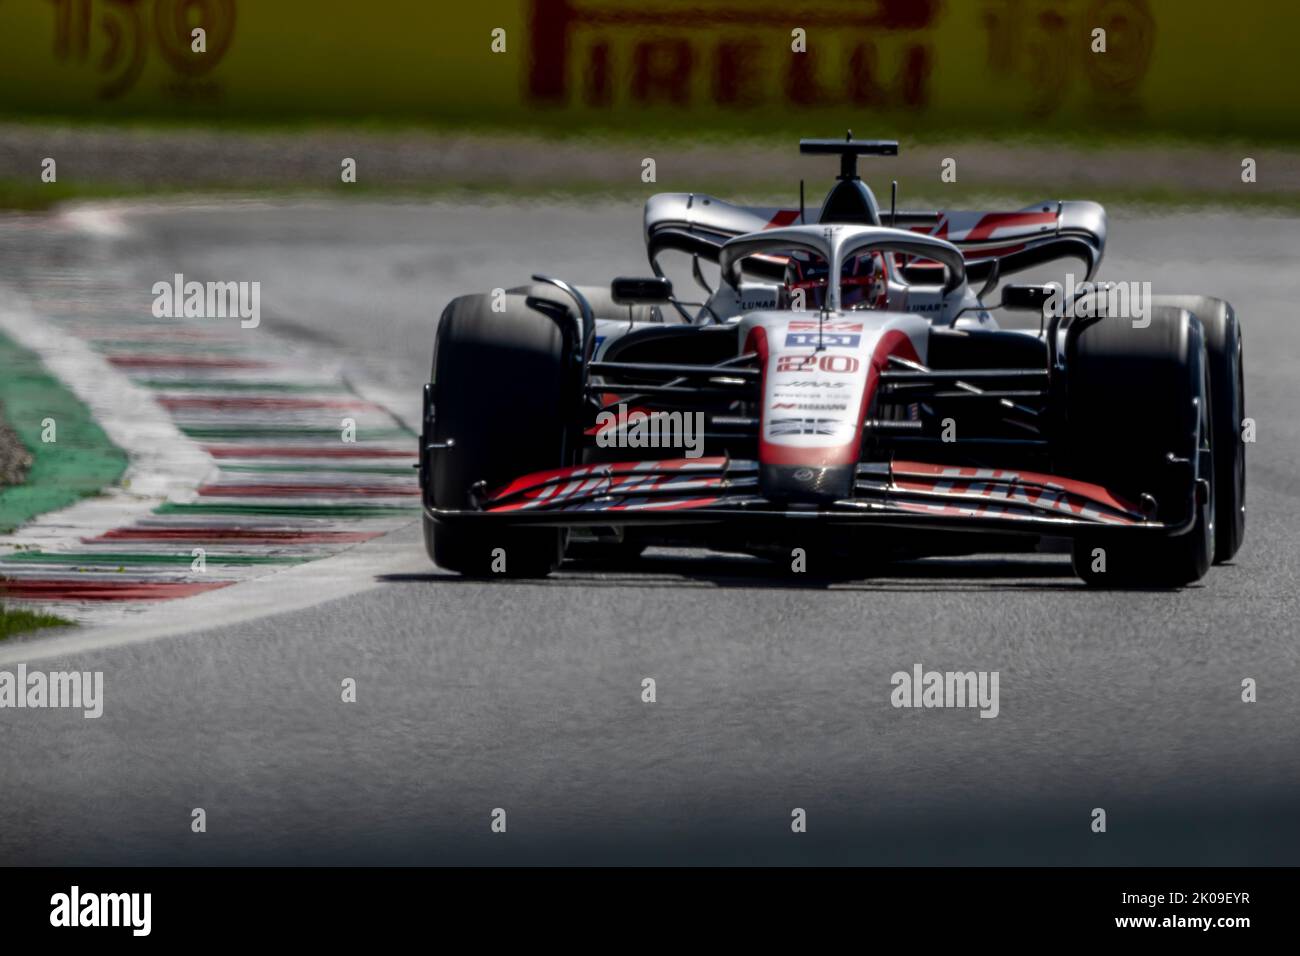 Monza, Italy, 10th Sep 2022, Mick Schumacher, from Germany competes for Haas F1 . Qualifying, round 16 of the 2022 Formula 1 championship. Credit: Michael Potts/Alamy Live News Stock Photo